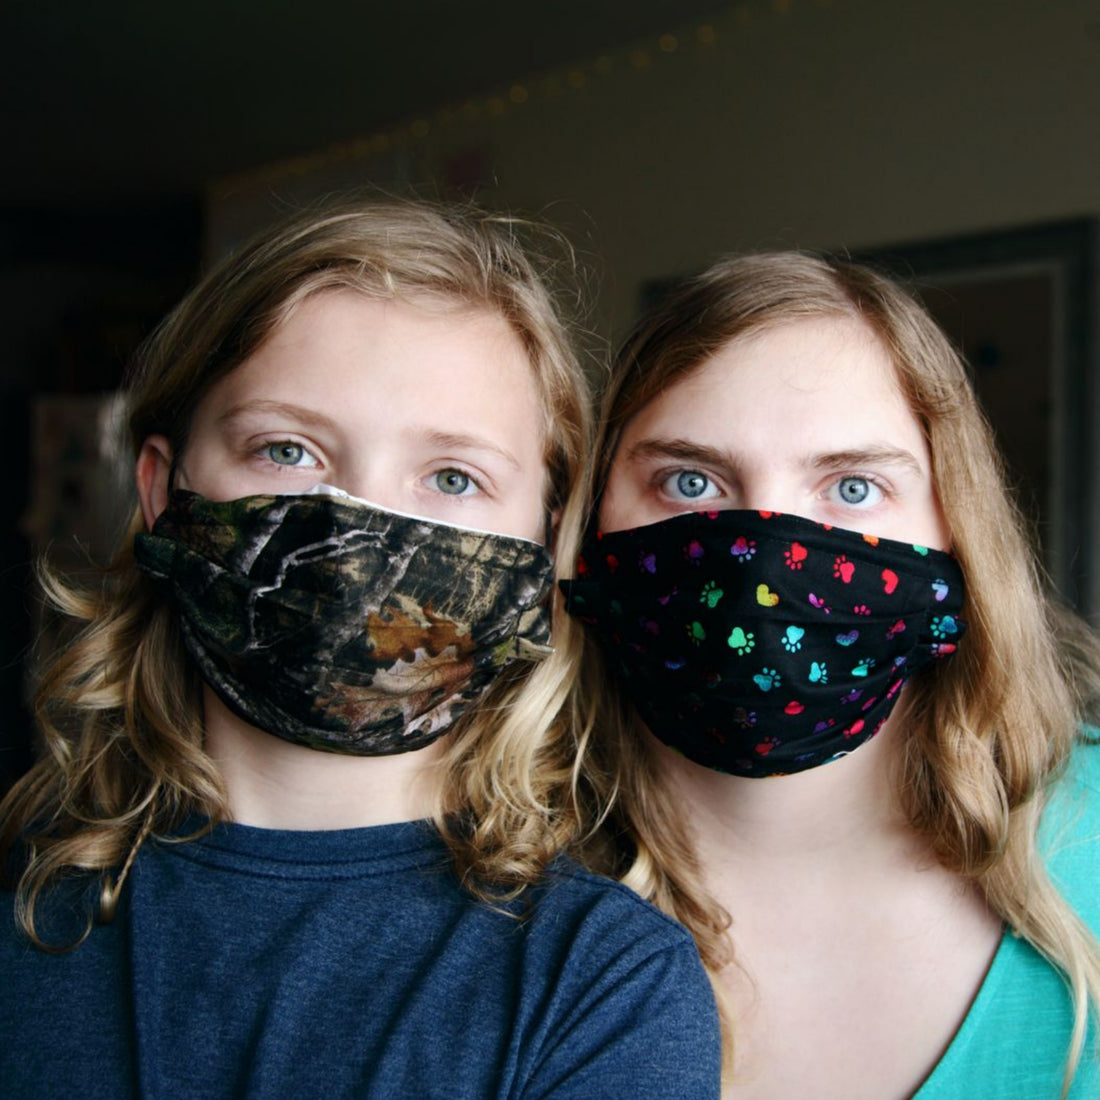 Austria Has 90% Drop in Coronavirus Cases After Requiring The Public to Wear Face Masks